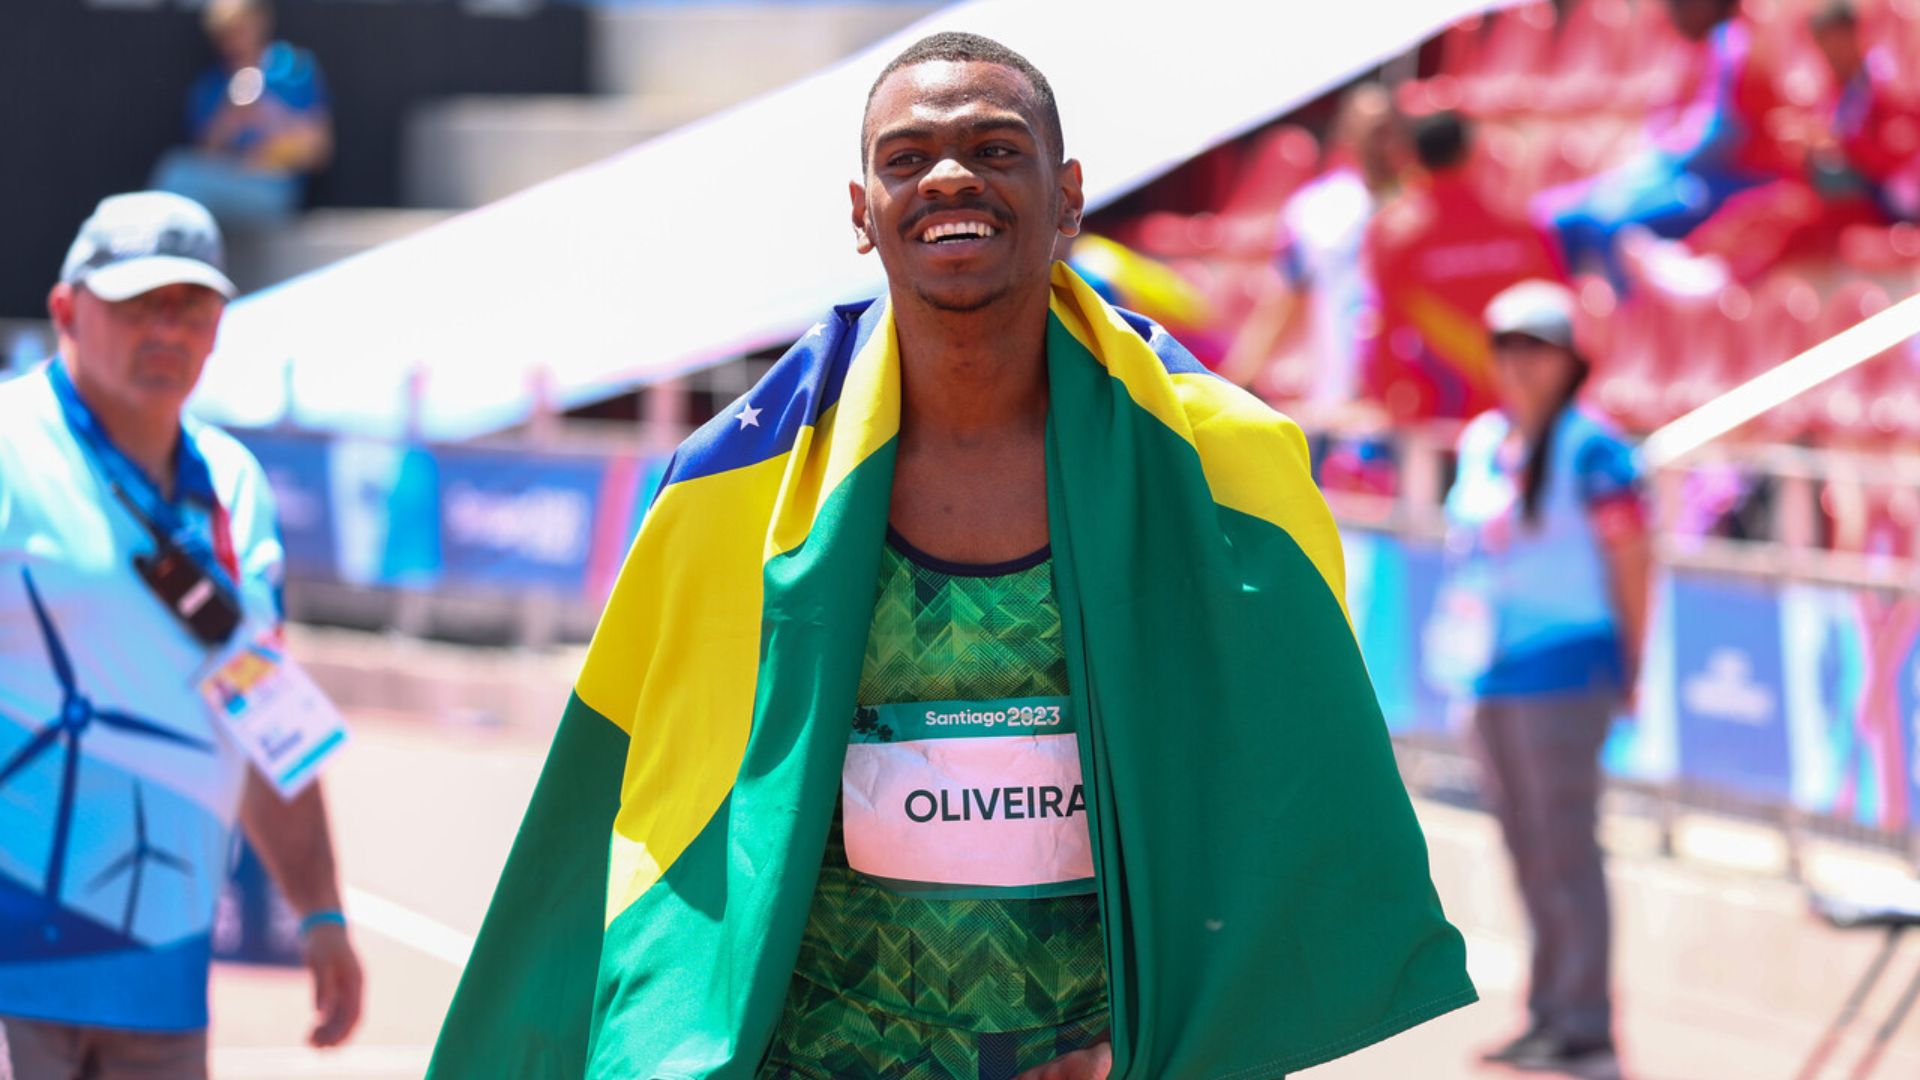 Oliveira Wins the 400m T20 with a New World Record